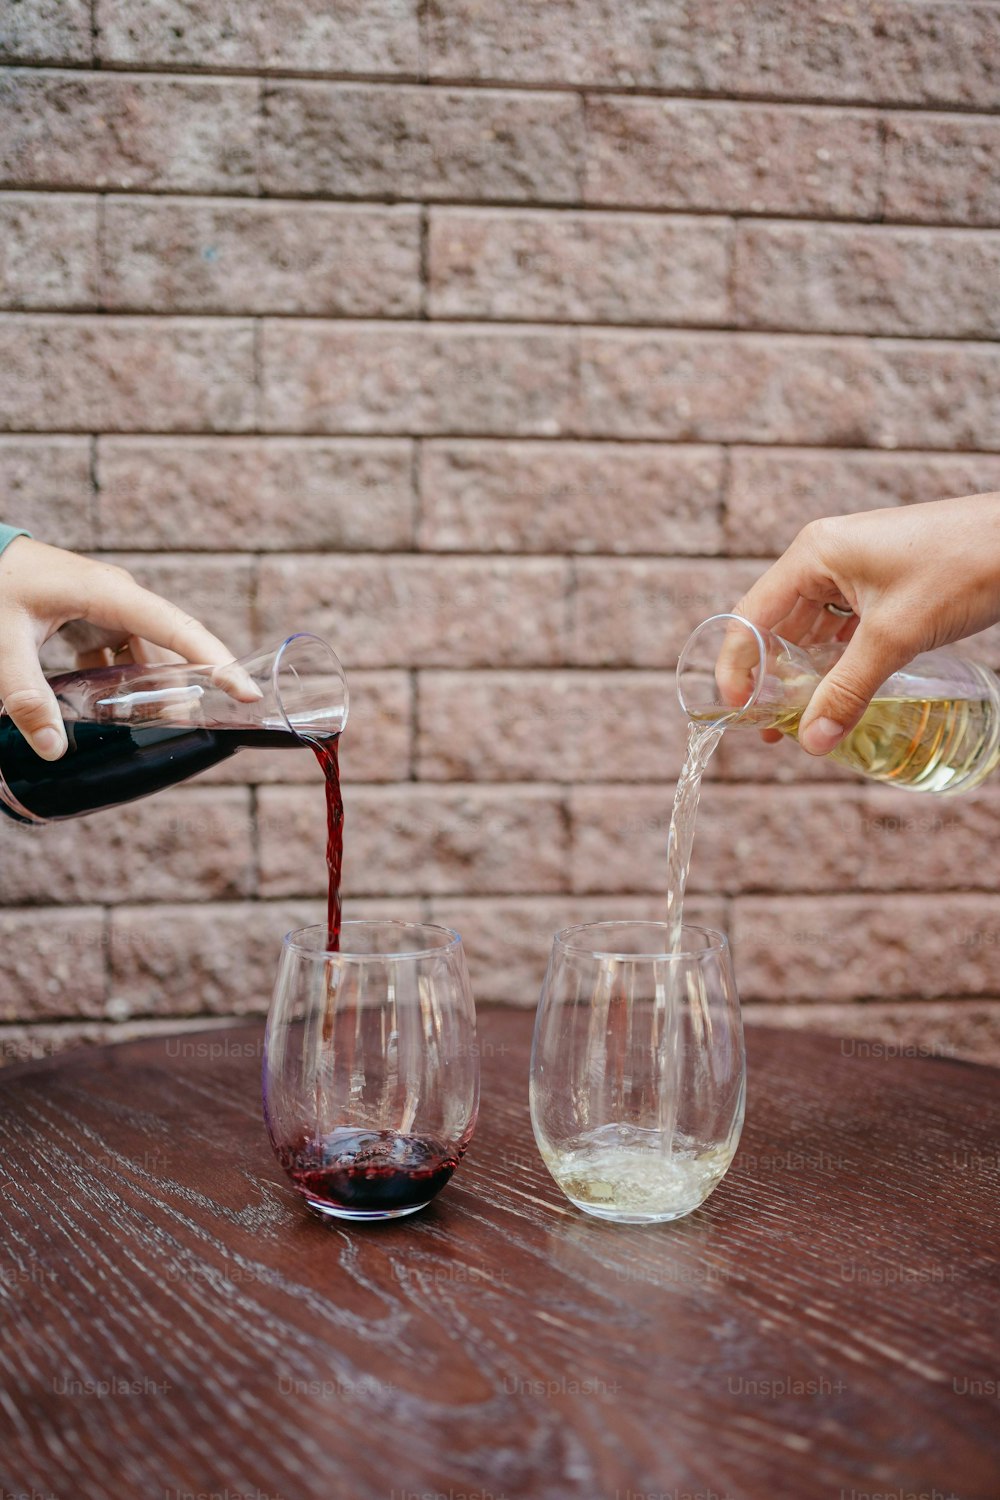 a person pouring wine into wine glasses on a table